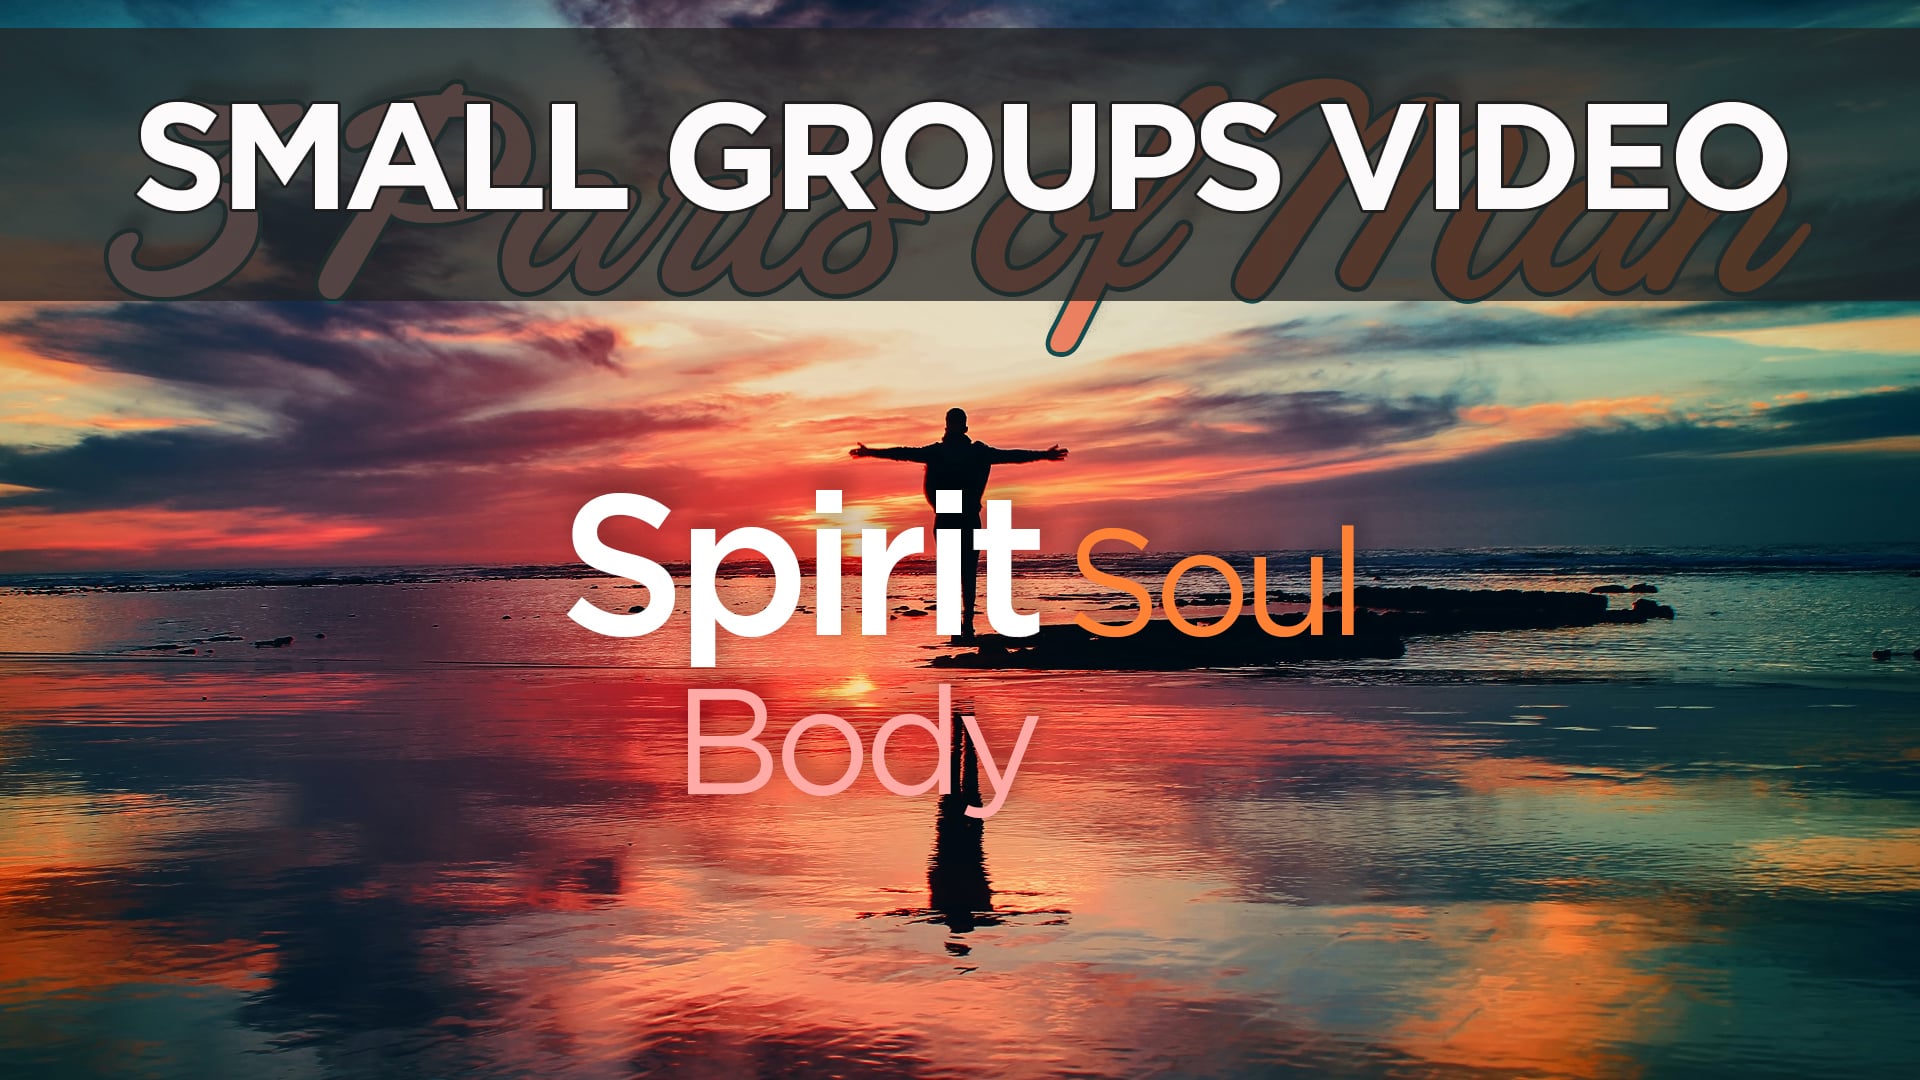 Small Groups Video - 6 Weeks of Body Soul Spirit - Session 1